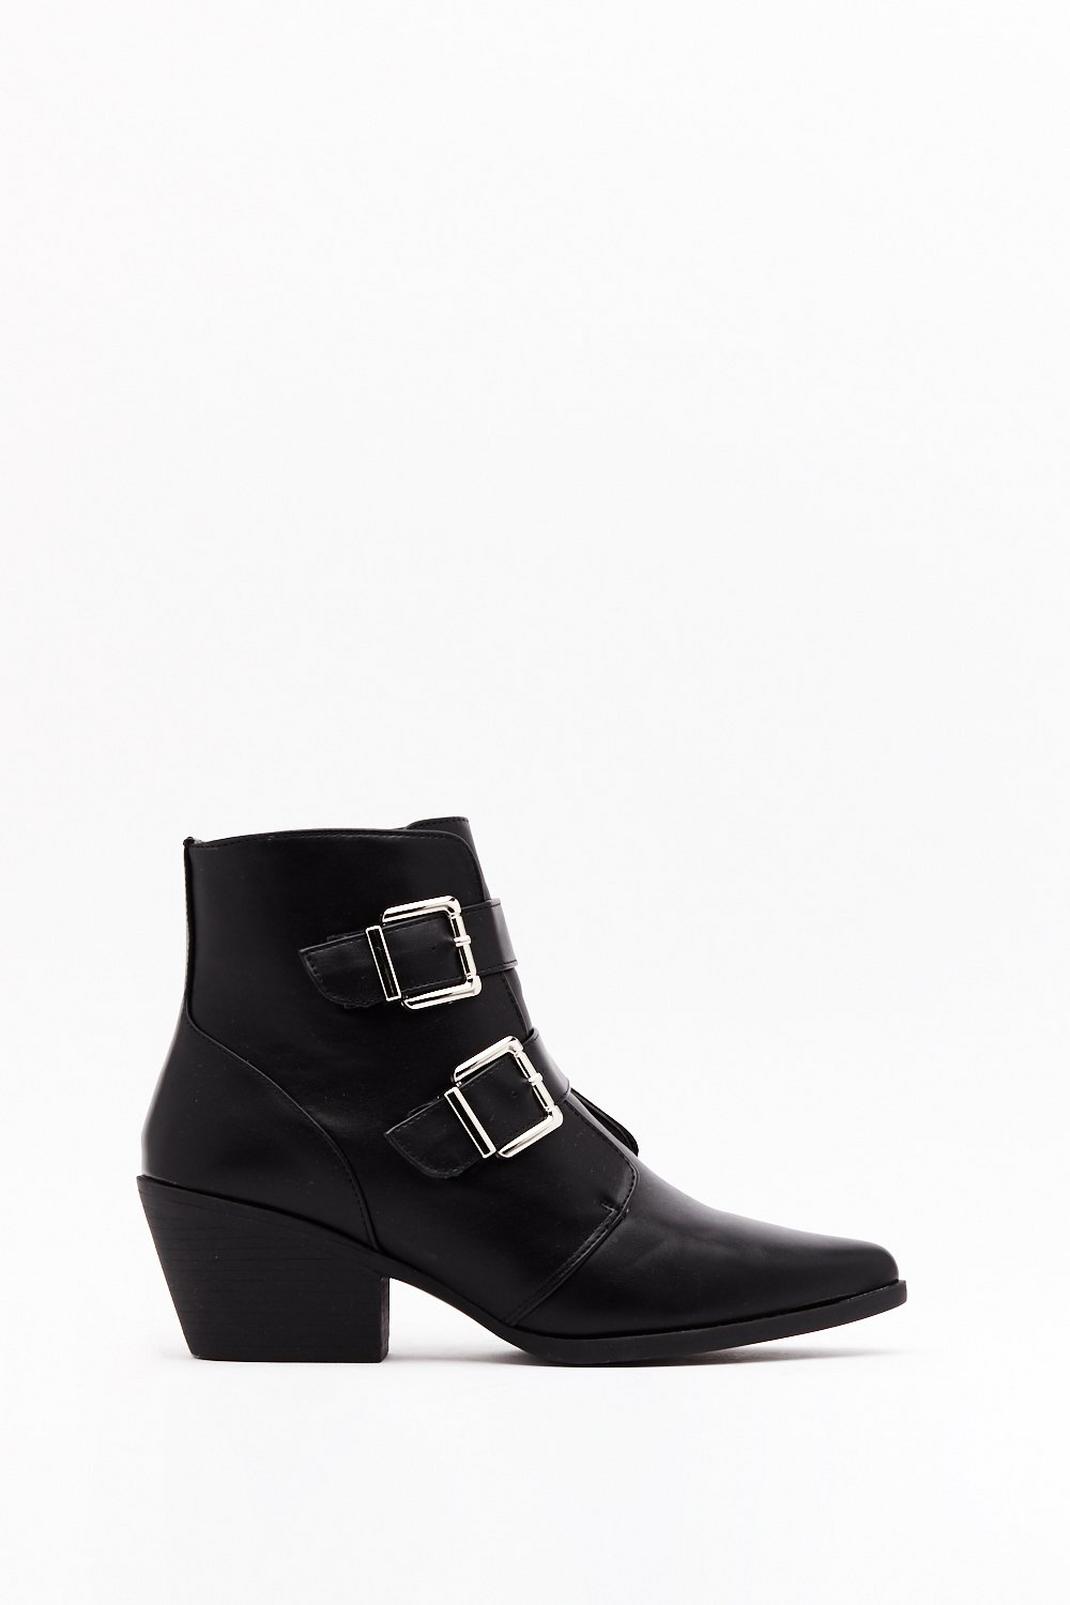 Double Trouble Faux Leather Buckle Boots image number 1